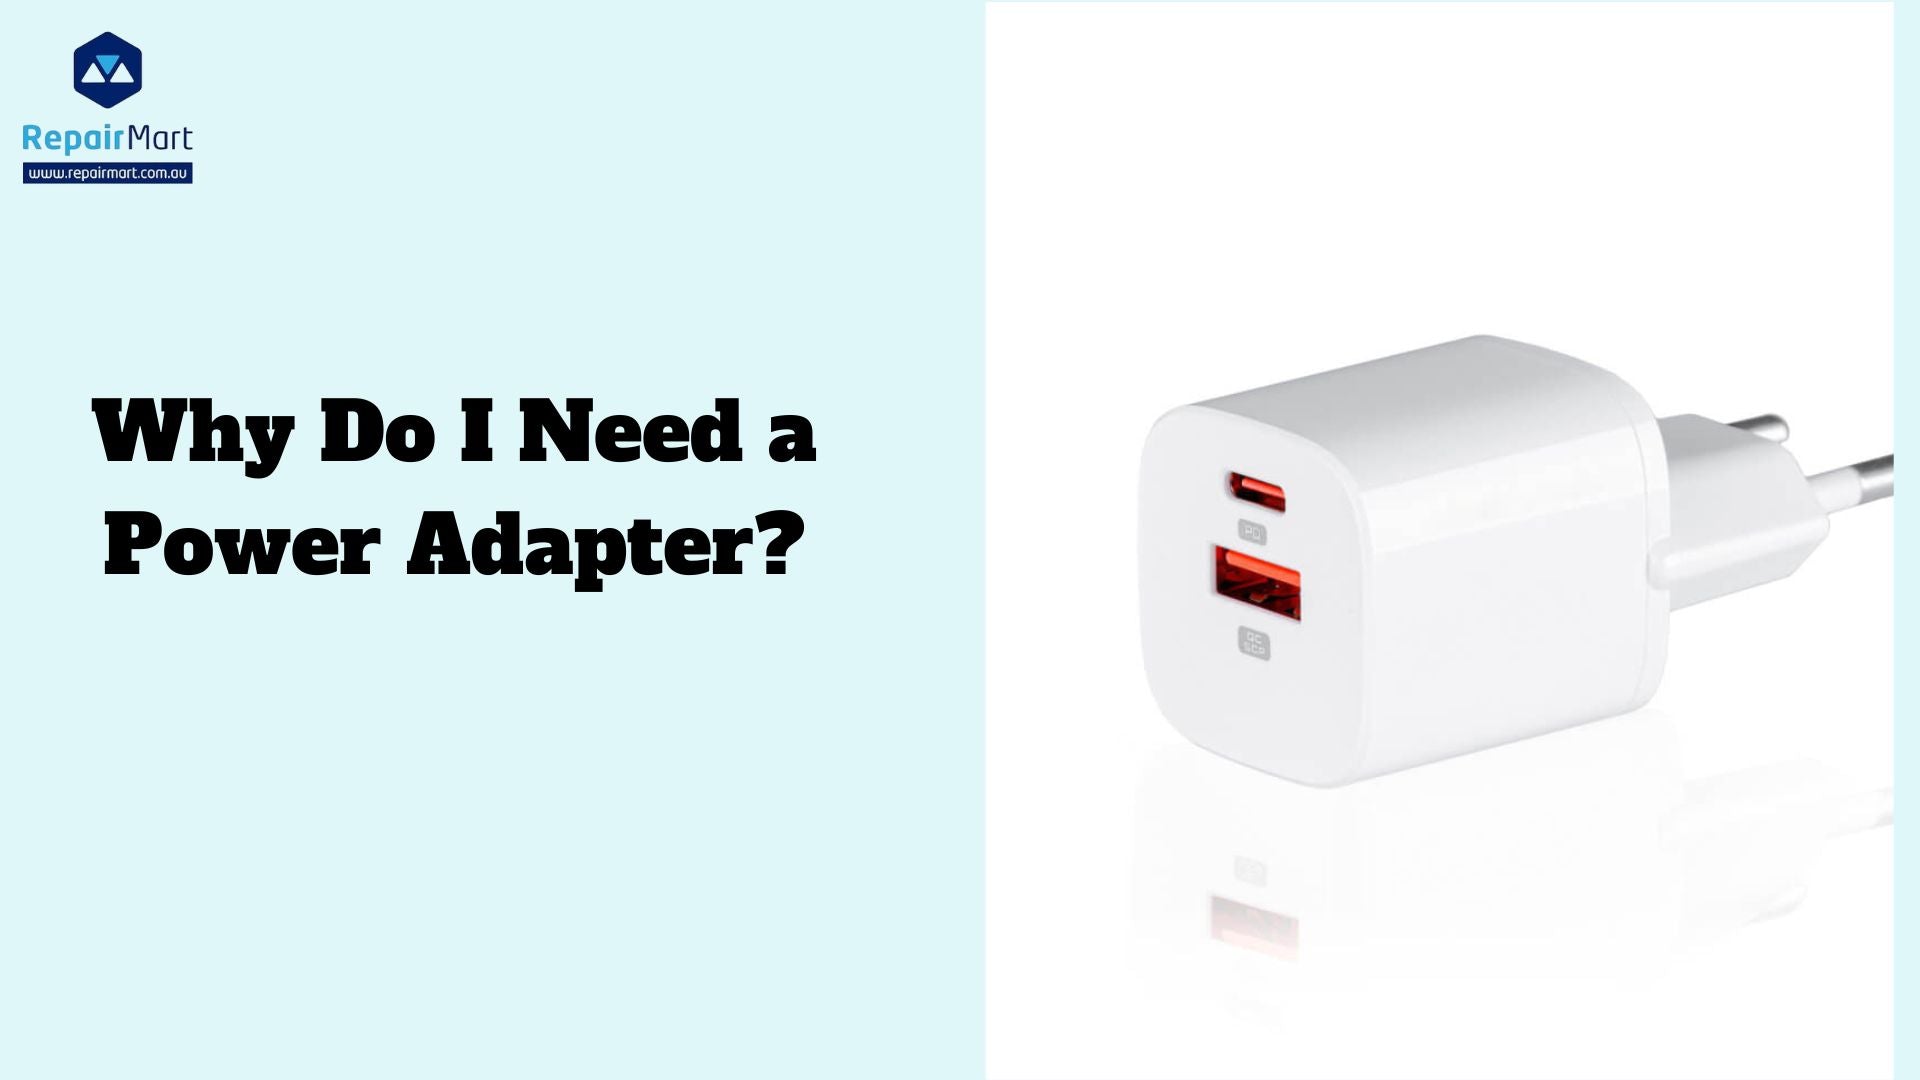 Why Do I Need a Power Adapter?